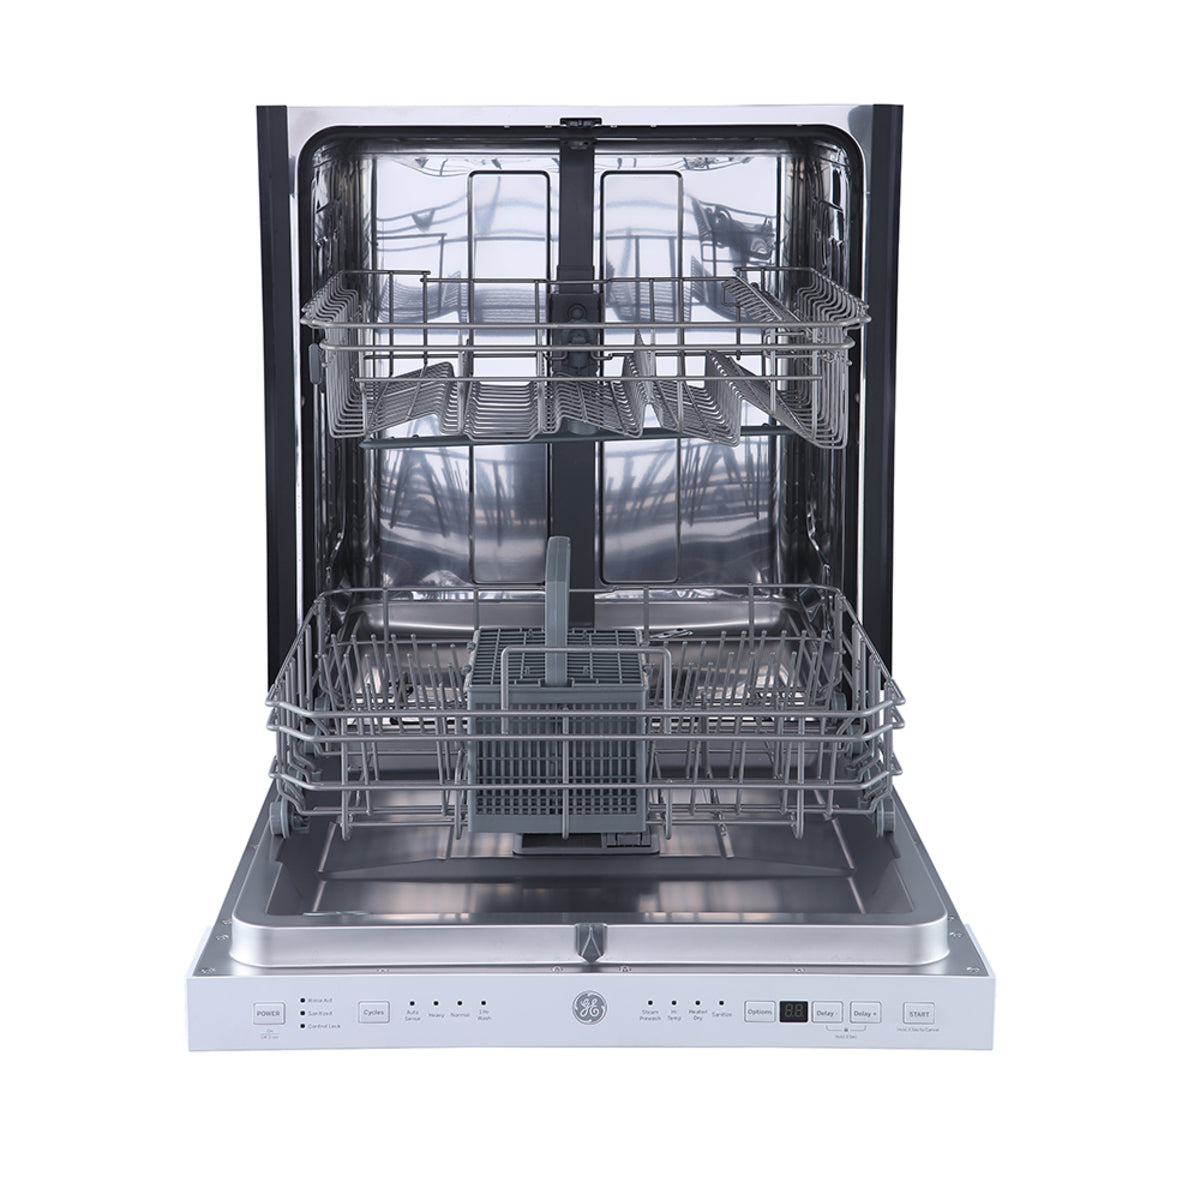 GE - 52 dBA Built In Dishwasher in Stainless - GBP534SGPWW